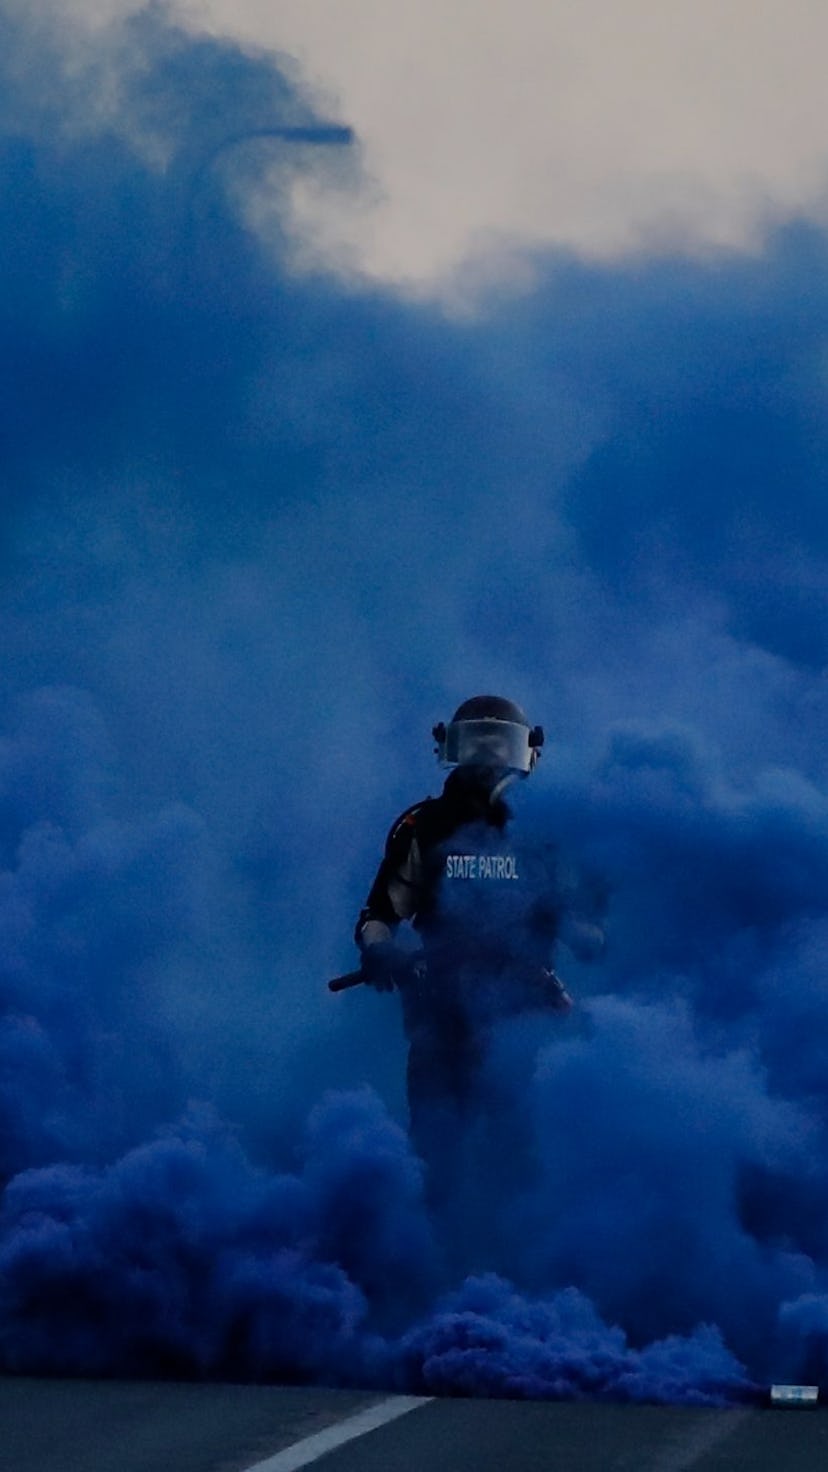 Police in riot gear walk through a cloud of blue smoke as they advance on protesters near the Minnea...